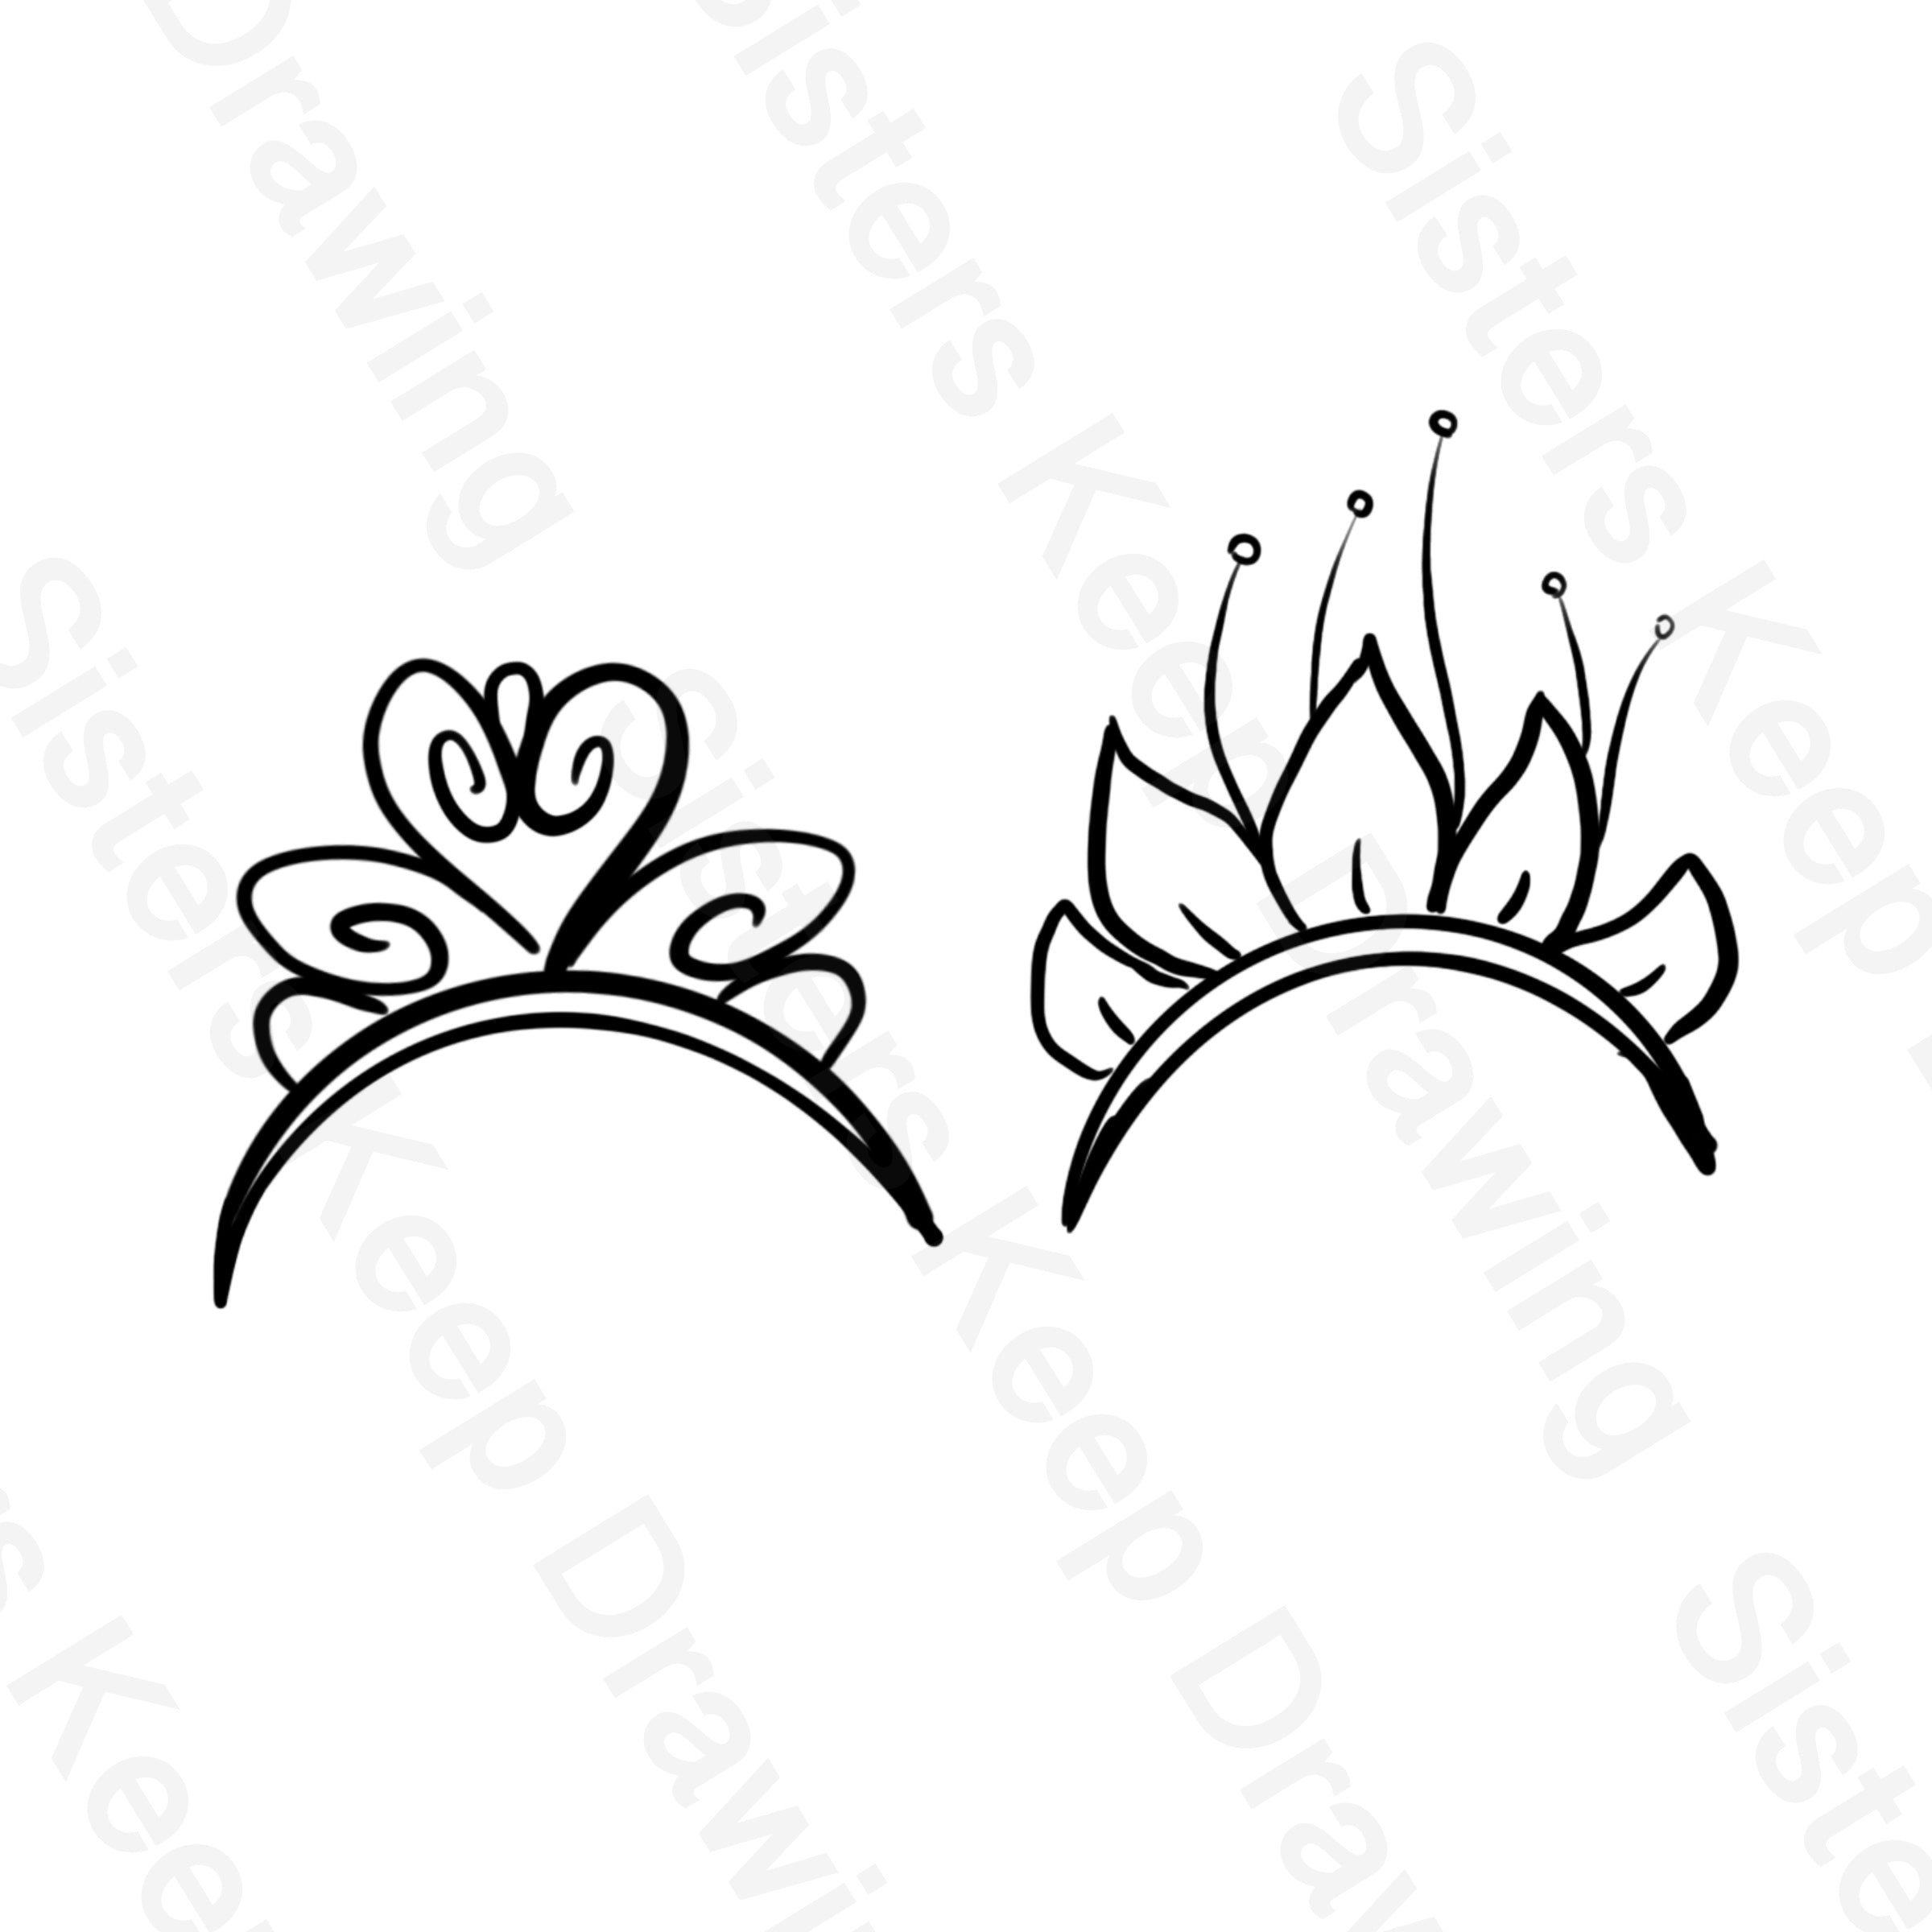 Princess Crowns PNG Picture, Cartoon Doodle Princess Crown, Car Drawing,  Cartoon Drawing, Crown Drawing PNG Image For Free Download